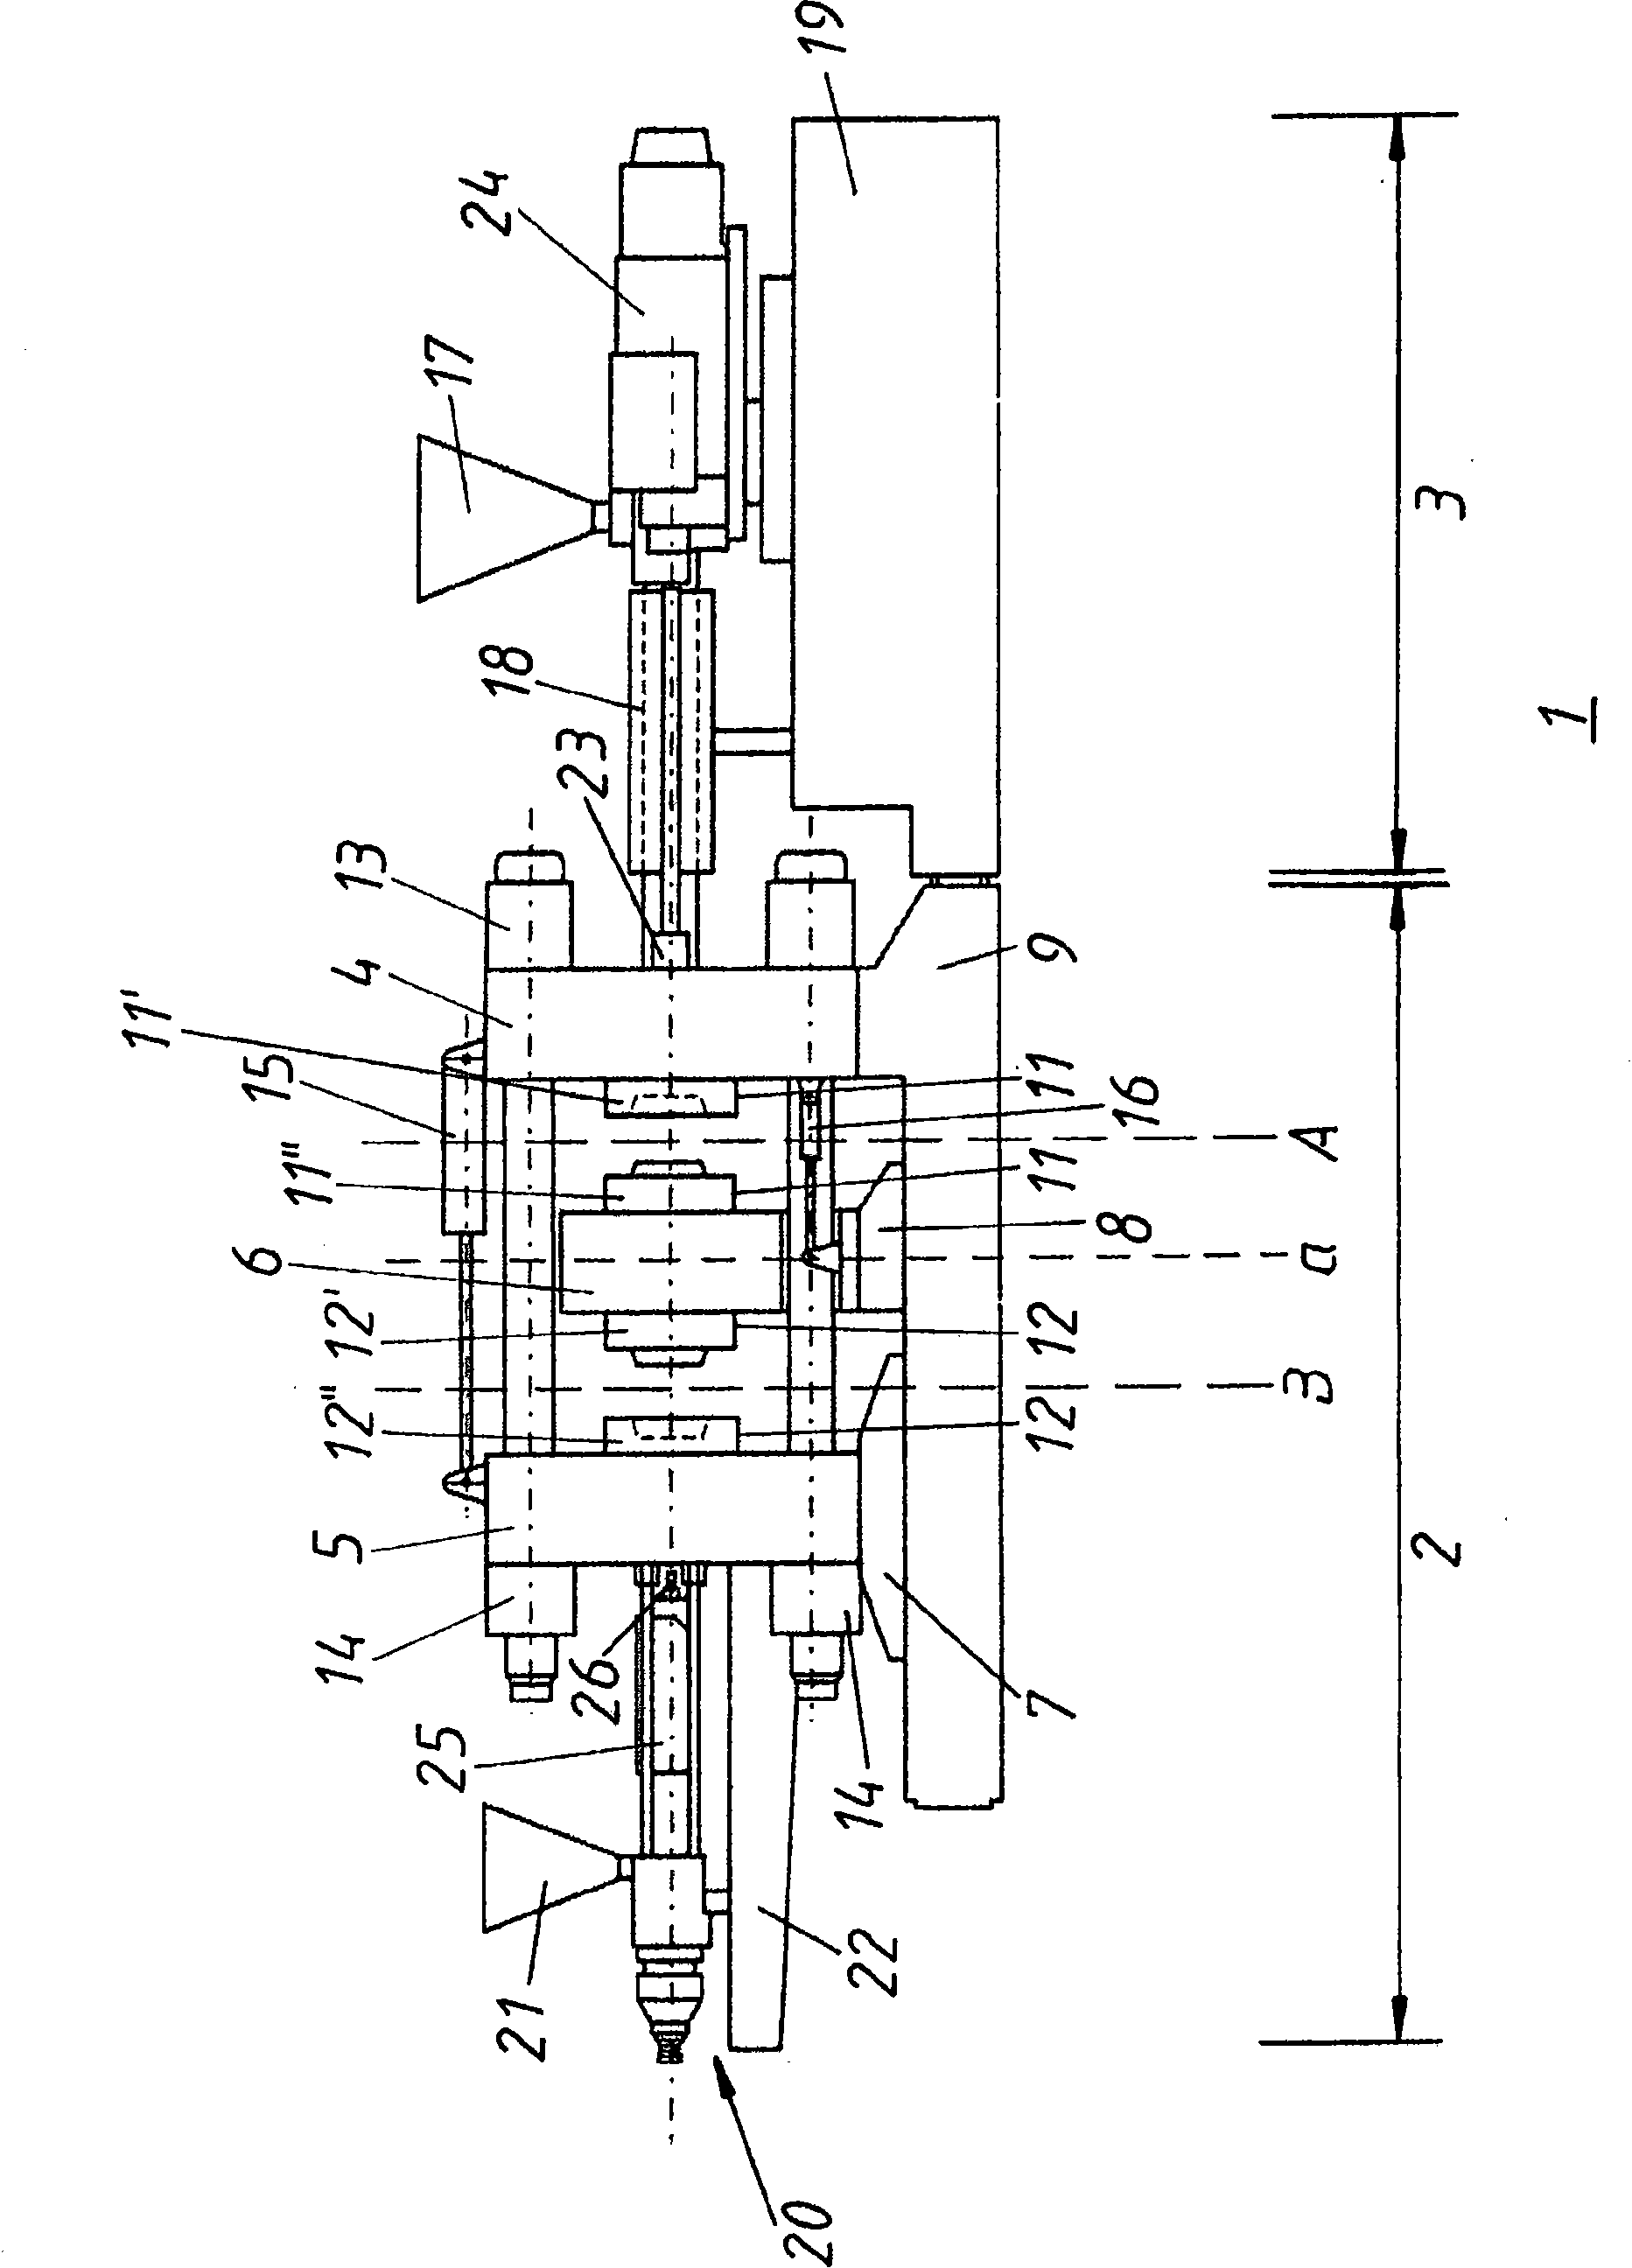 Method for producing composite or farrago structure